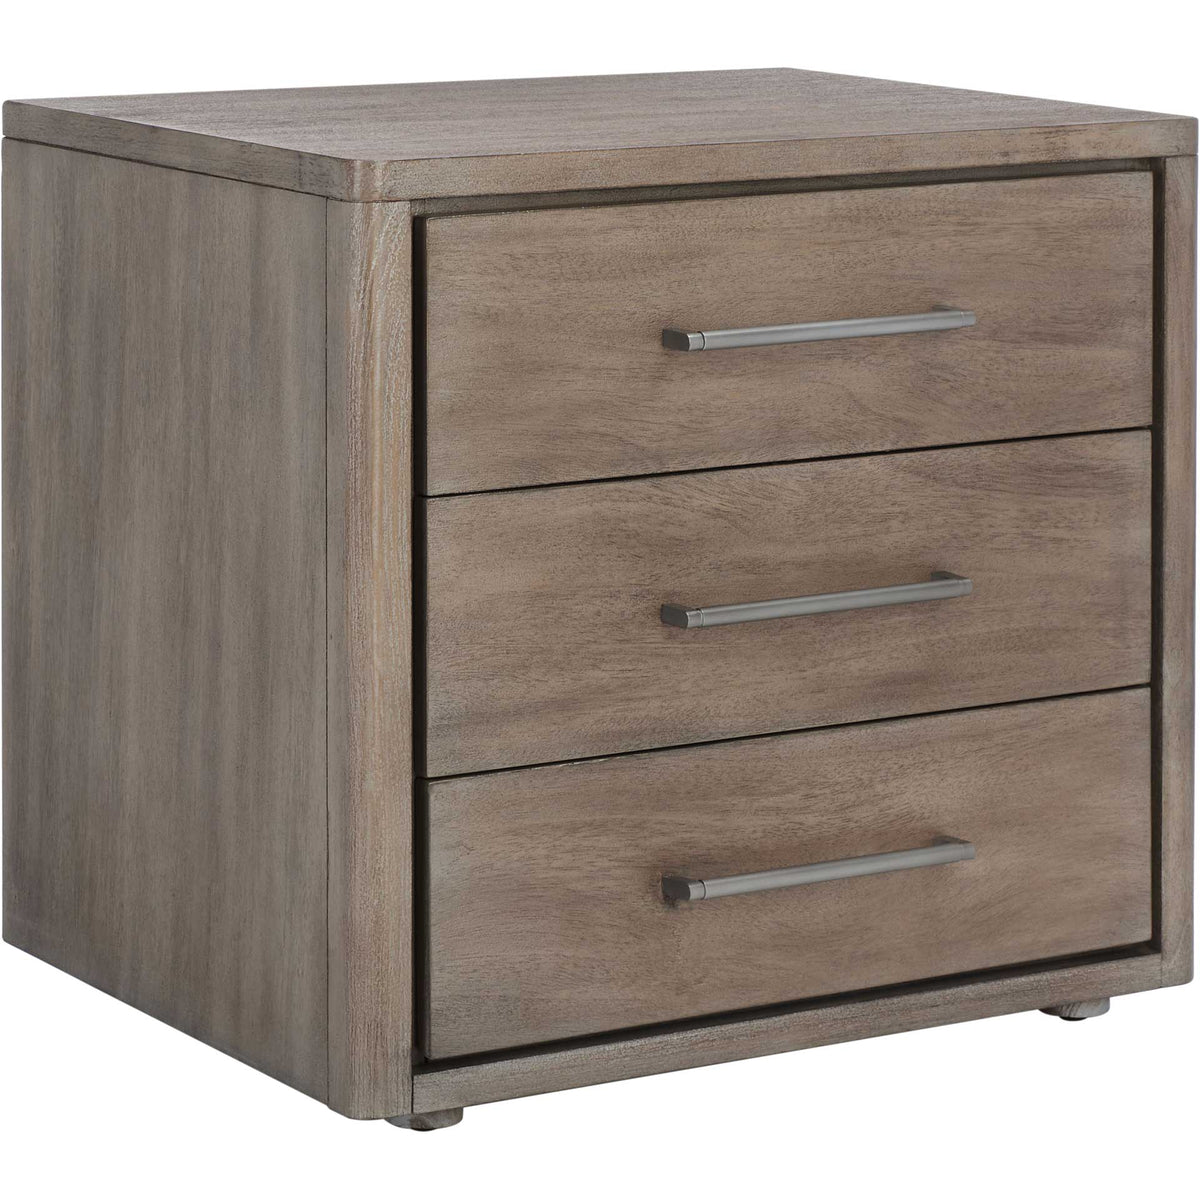 Romilly 3 Drawer Wood Nightstand Light Brown